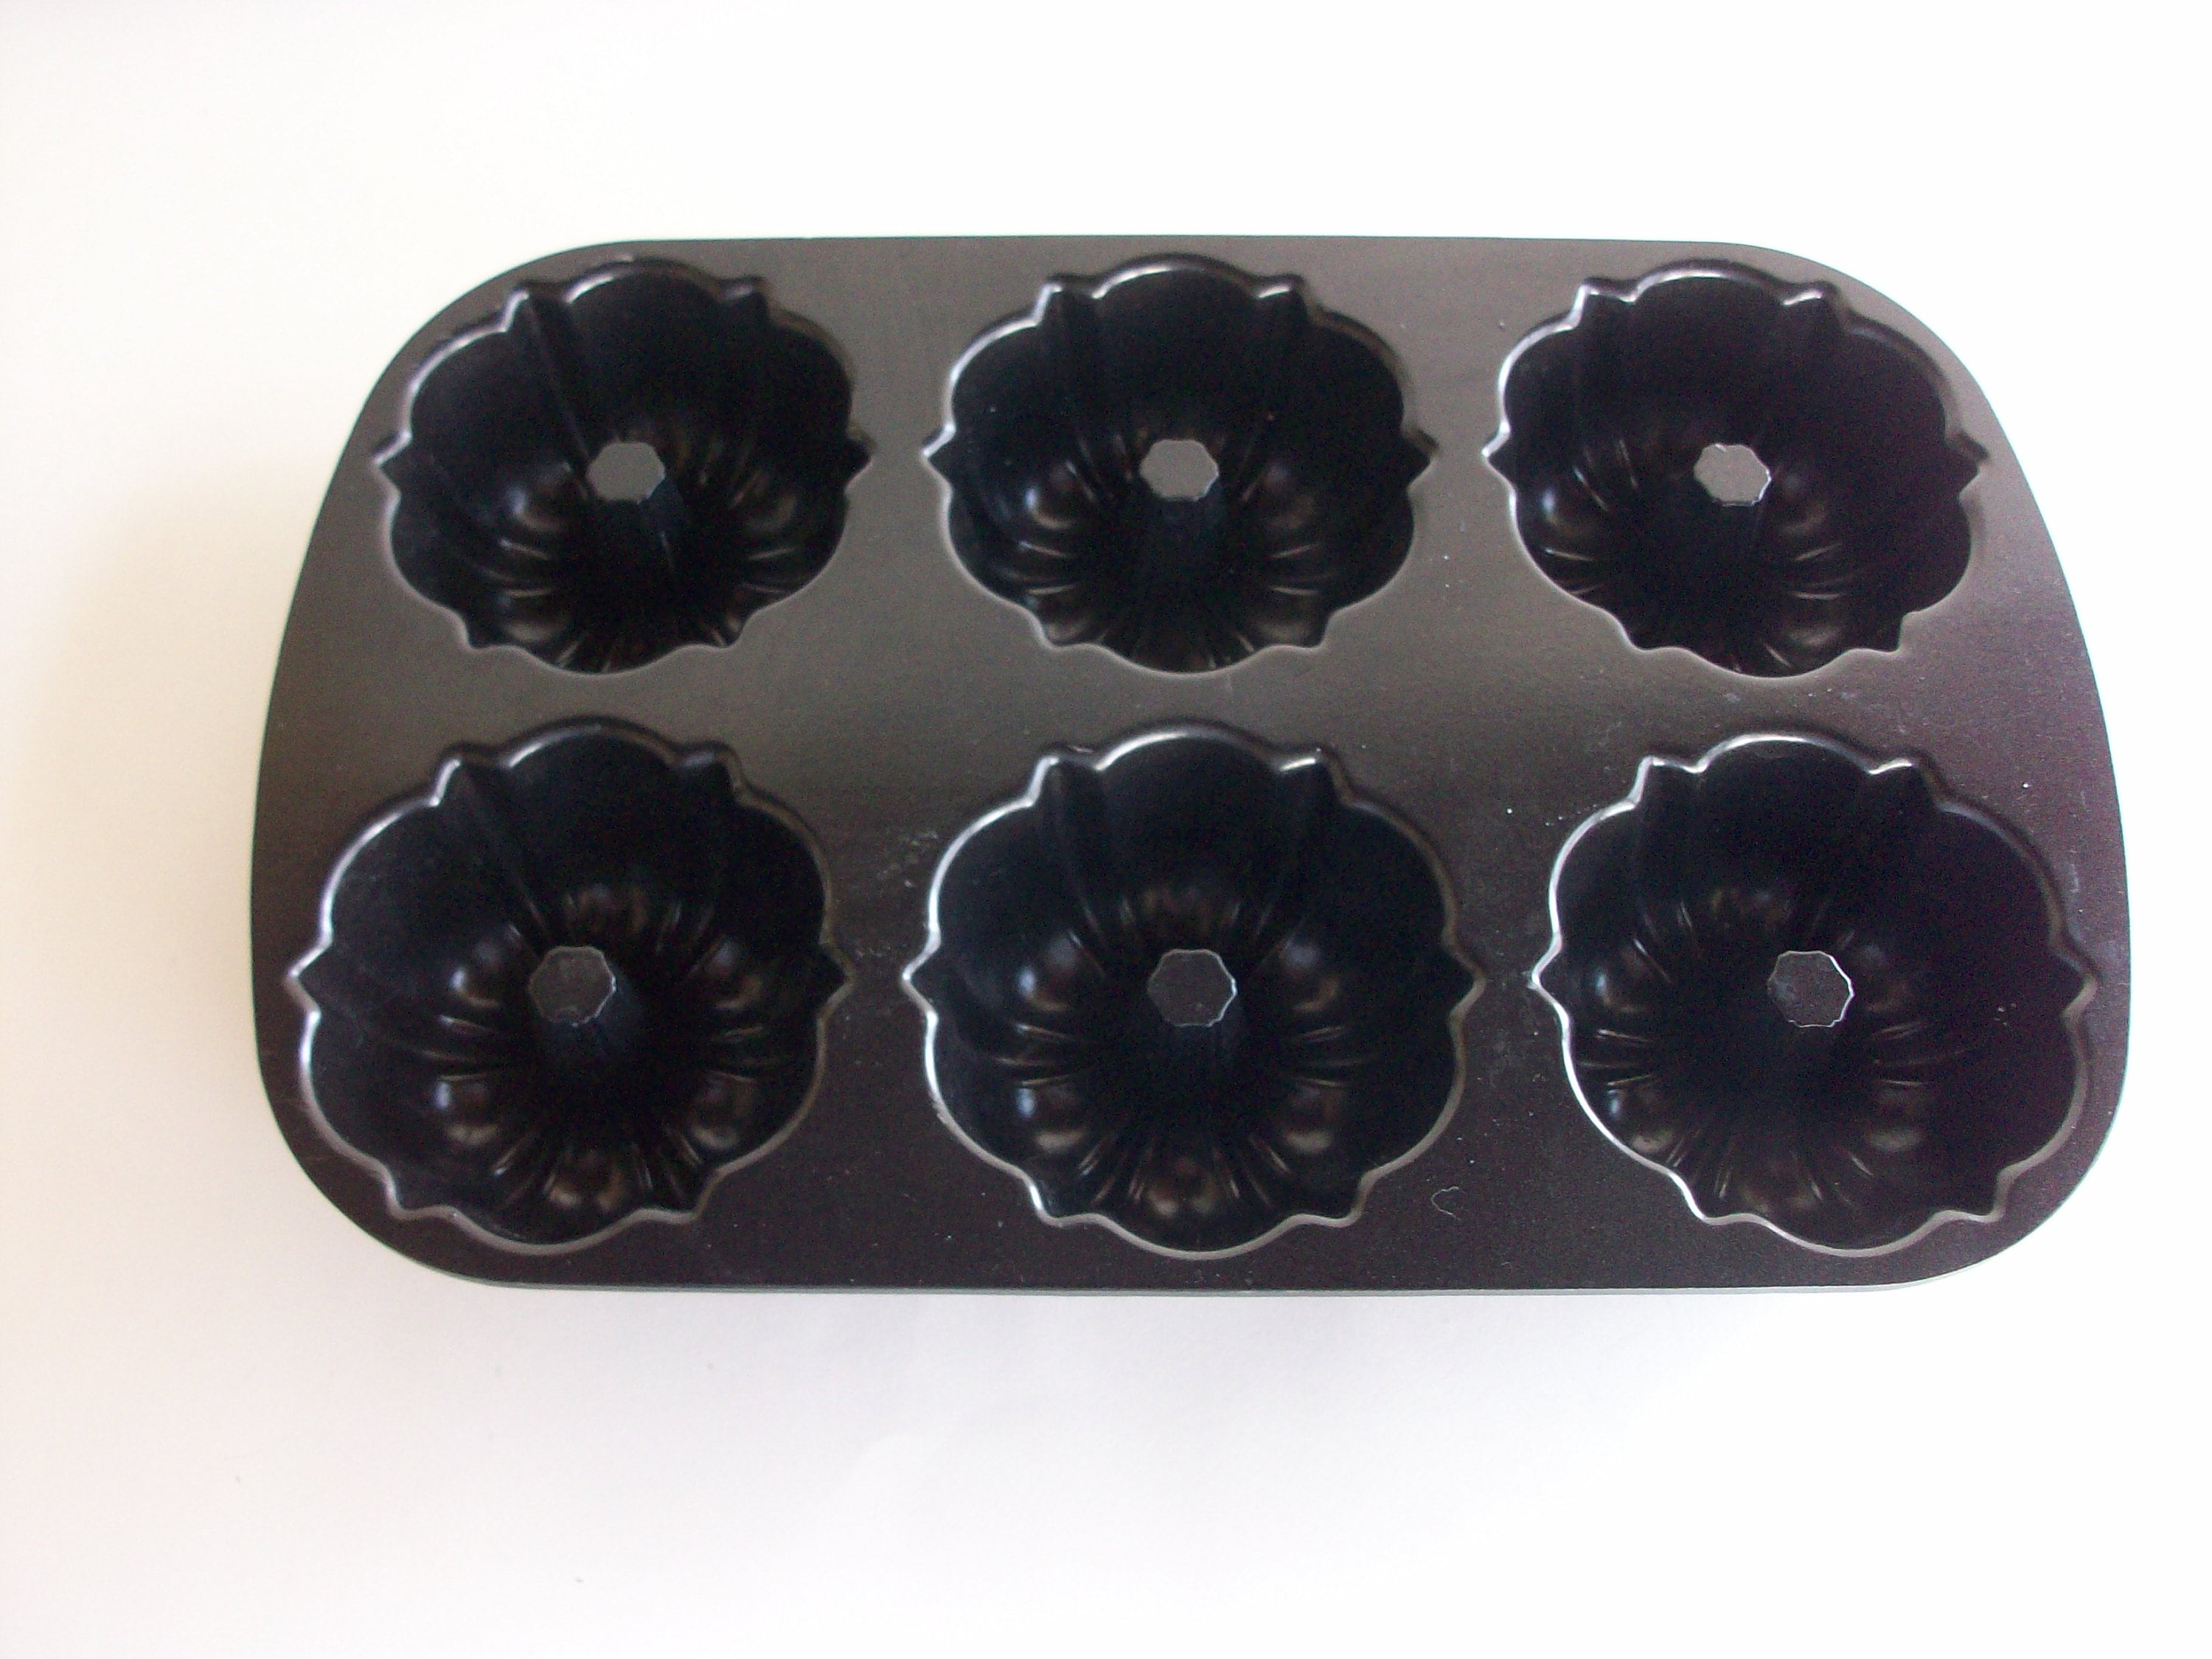 New Nordic Ware FESTIVAL 6 Mini Bundt Muffin Aluminum Pan Platinum  Collection Made in USA Perfect Christmas Gift 